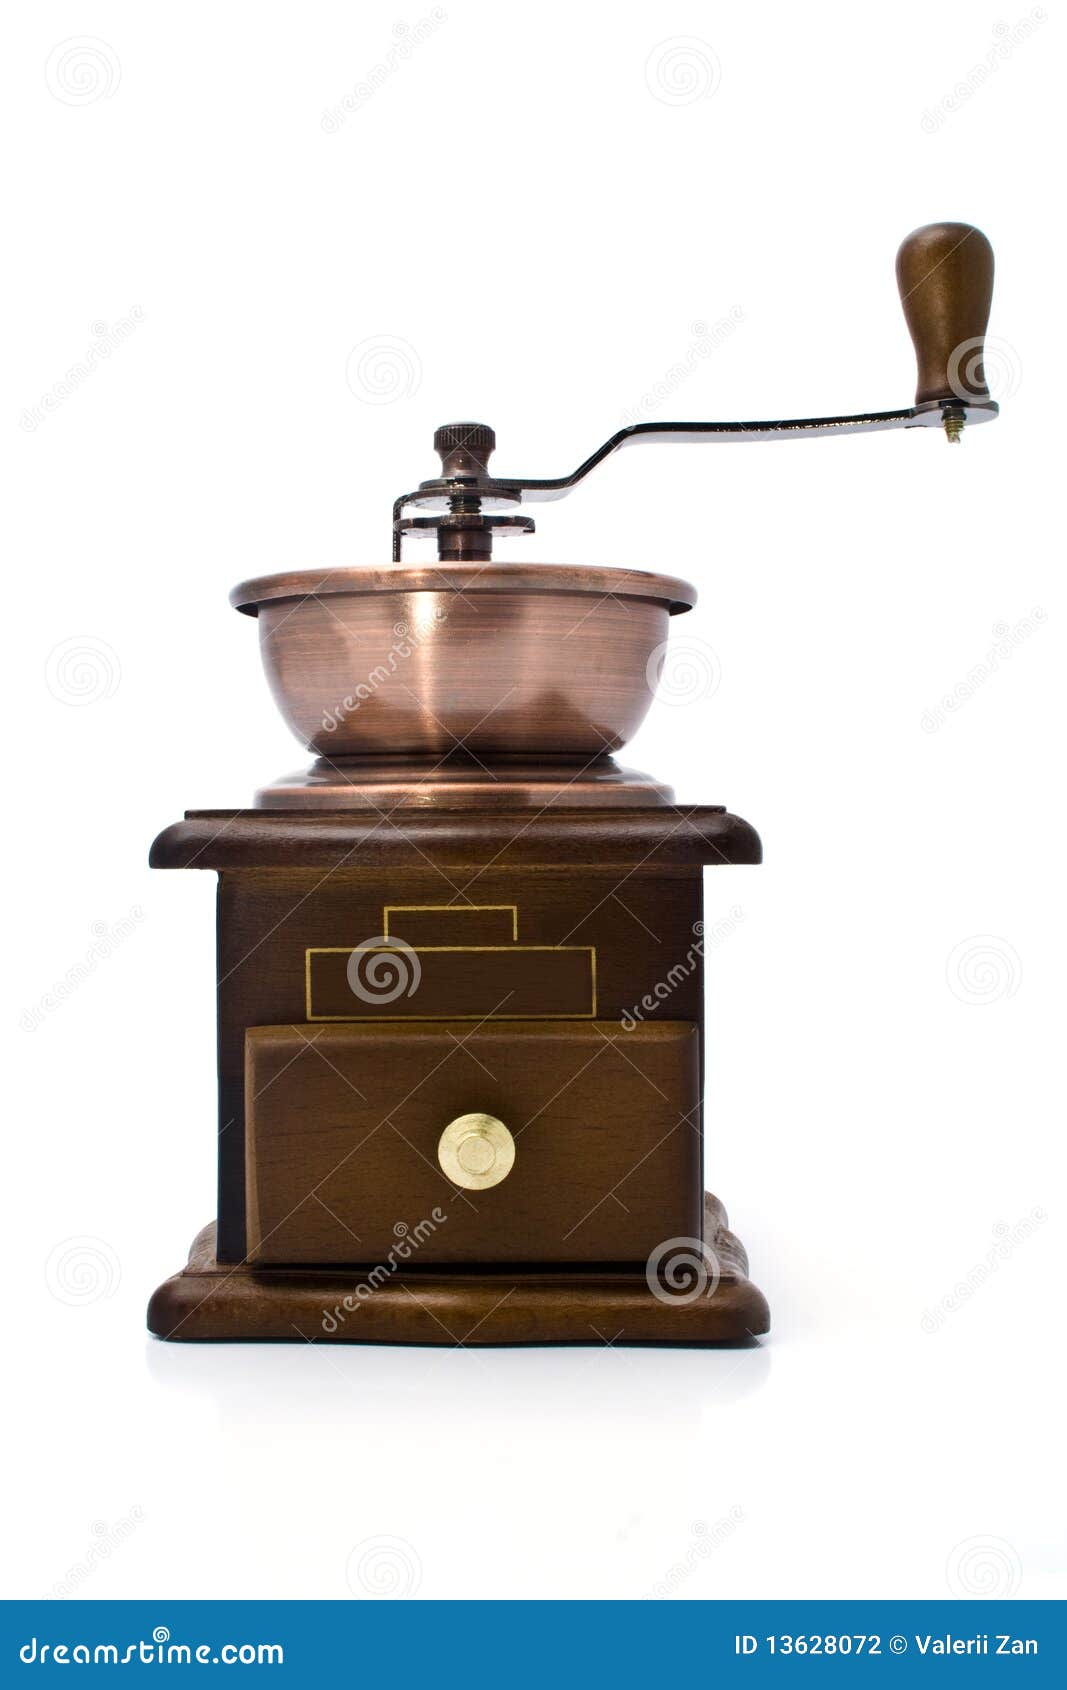 coffee grinder clipart - photo #43